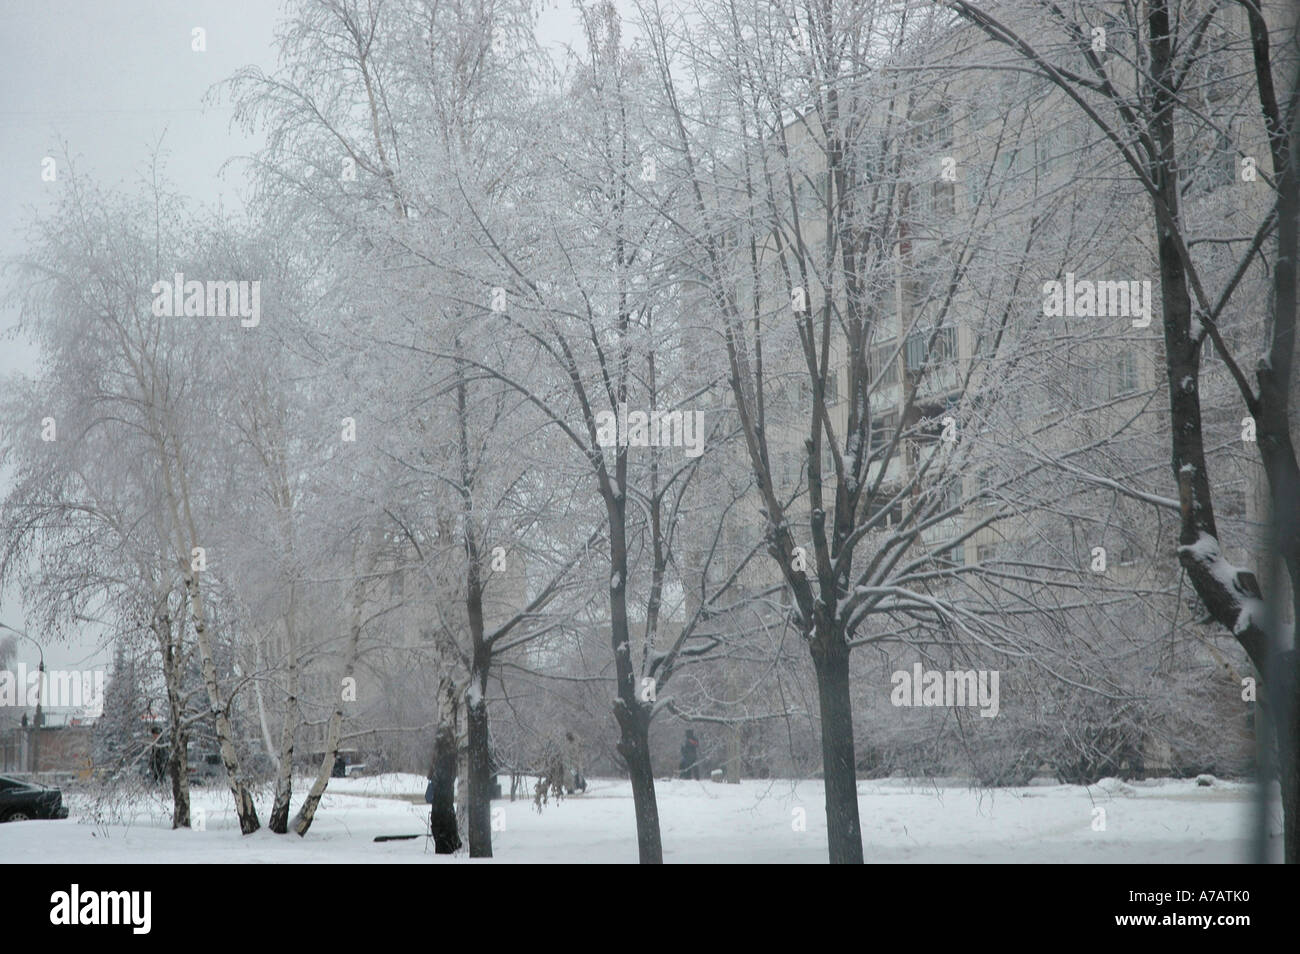 Frozen trees in front of a building made with precast concrete slabs in Siberia Stock Photo